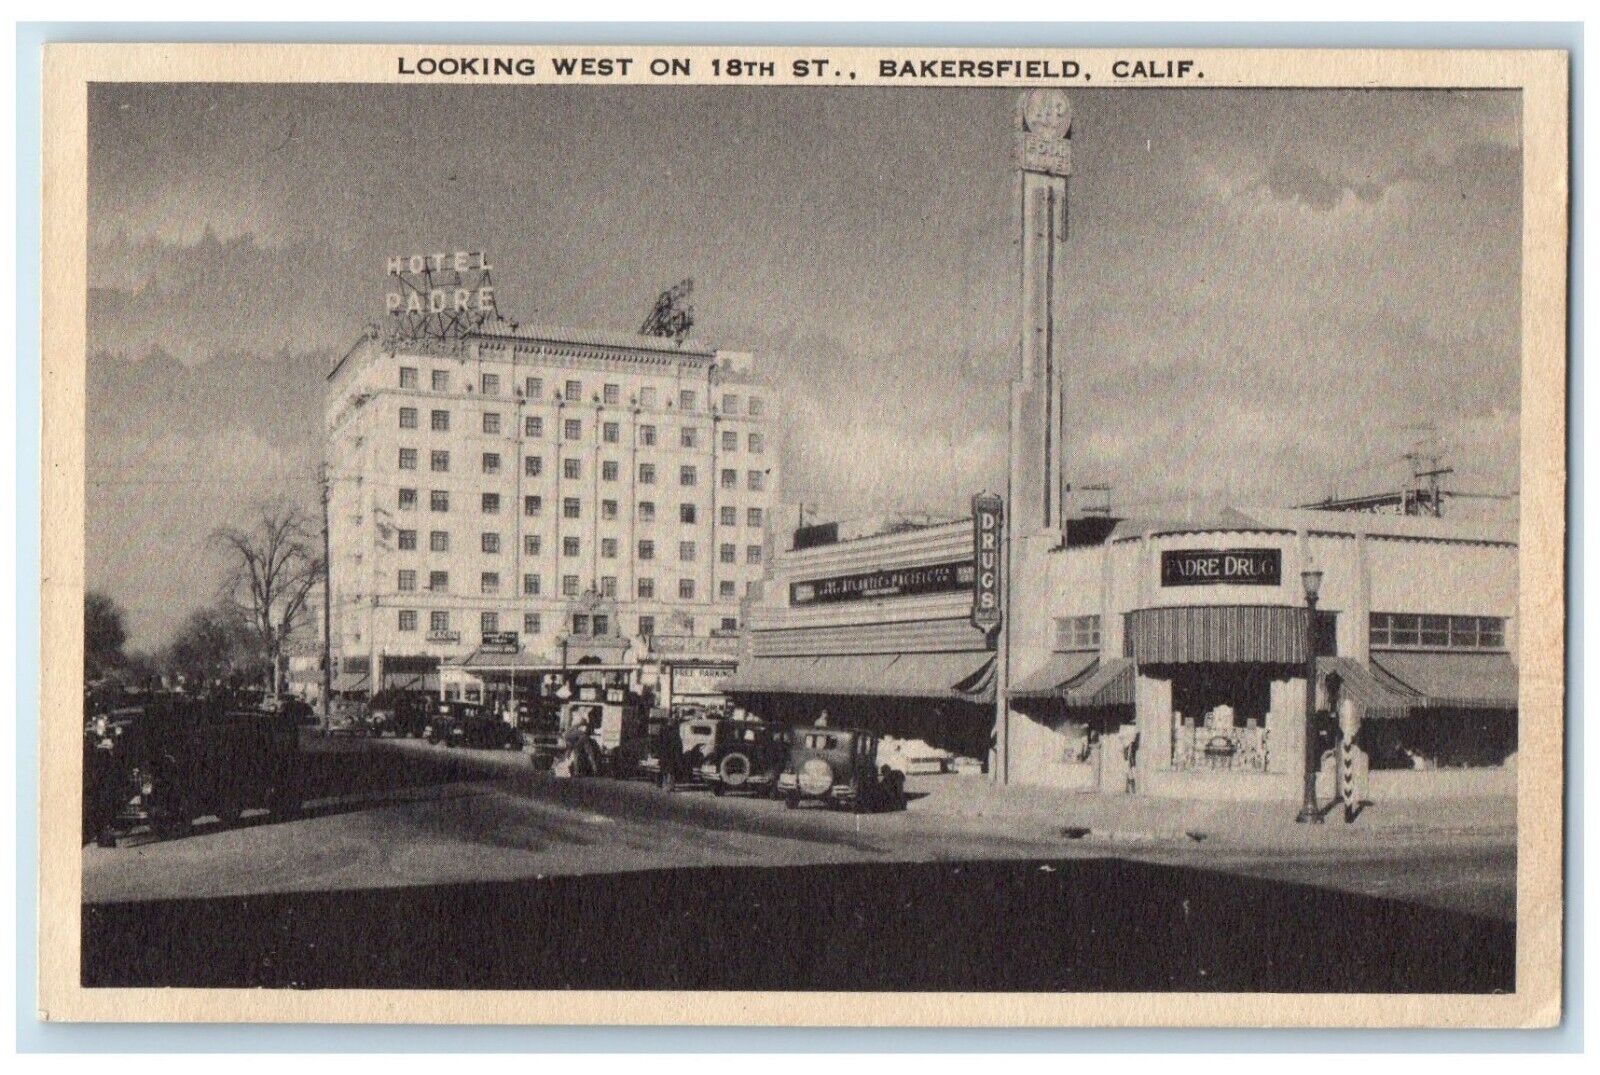 c1940 Looking West 18th Exterior View Building Bakersfield California Postcard